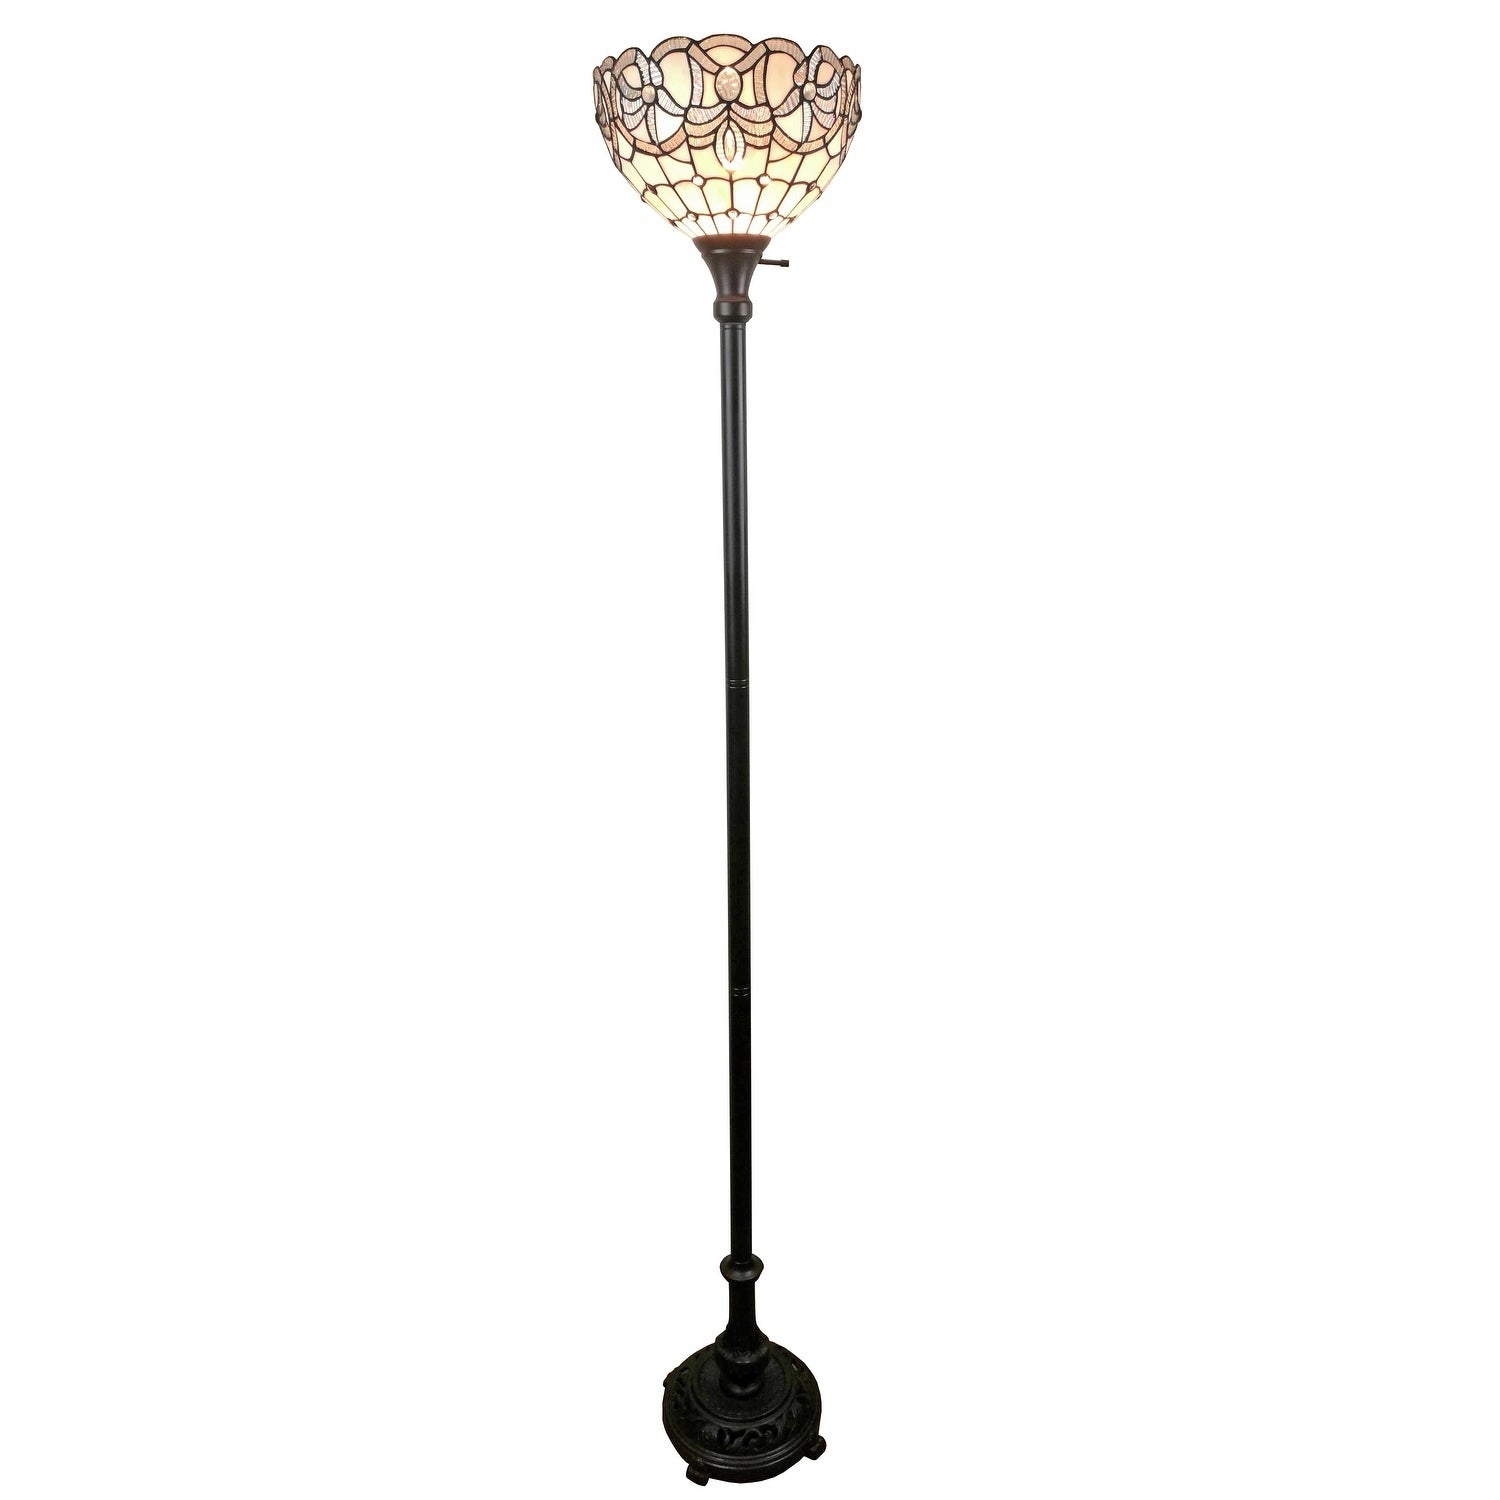 Amora Lighting Am284fl12 Tiffany Style White Torchiere Floor Lamp 72 Inches Tall regarding proportions 1500 X 1500